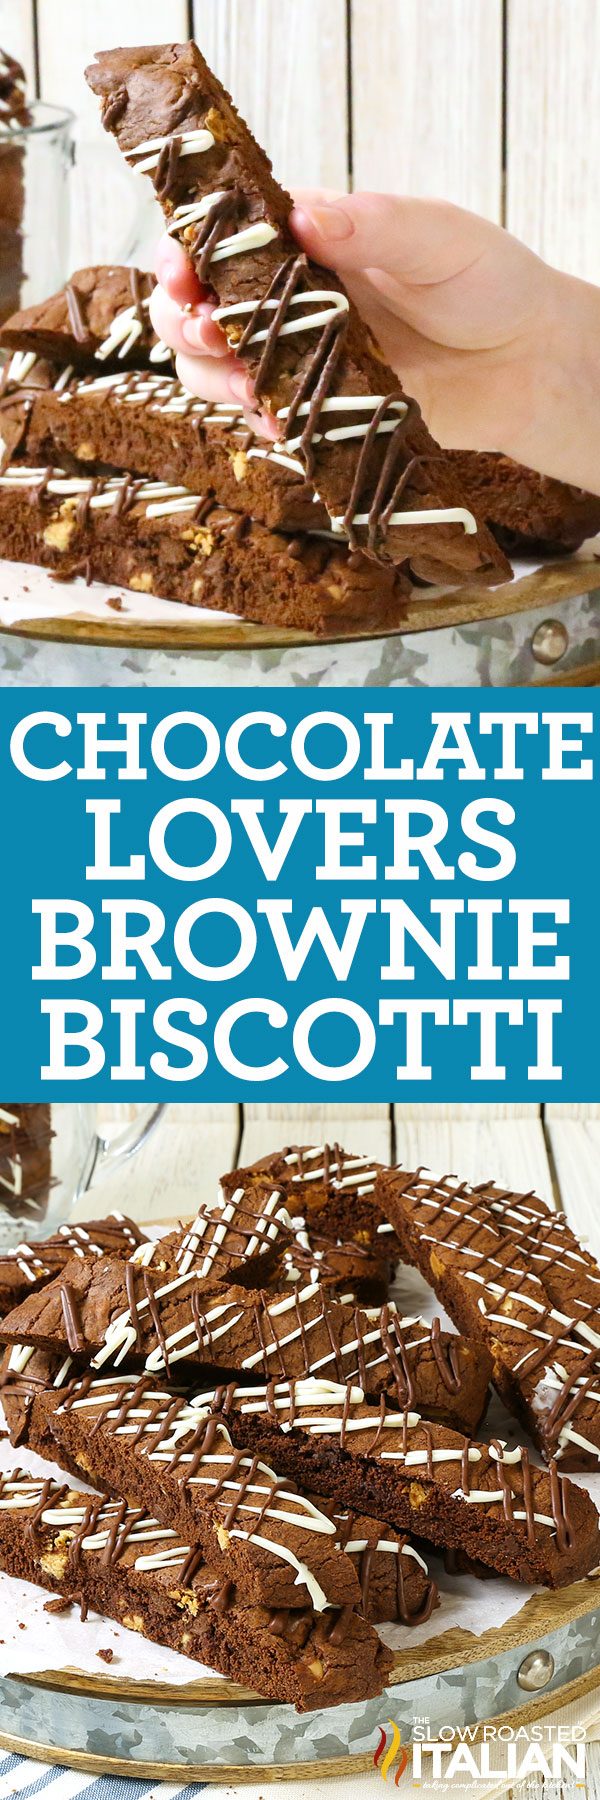 titled collage for chocolate biscotti recipe